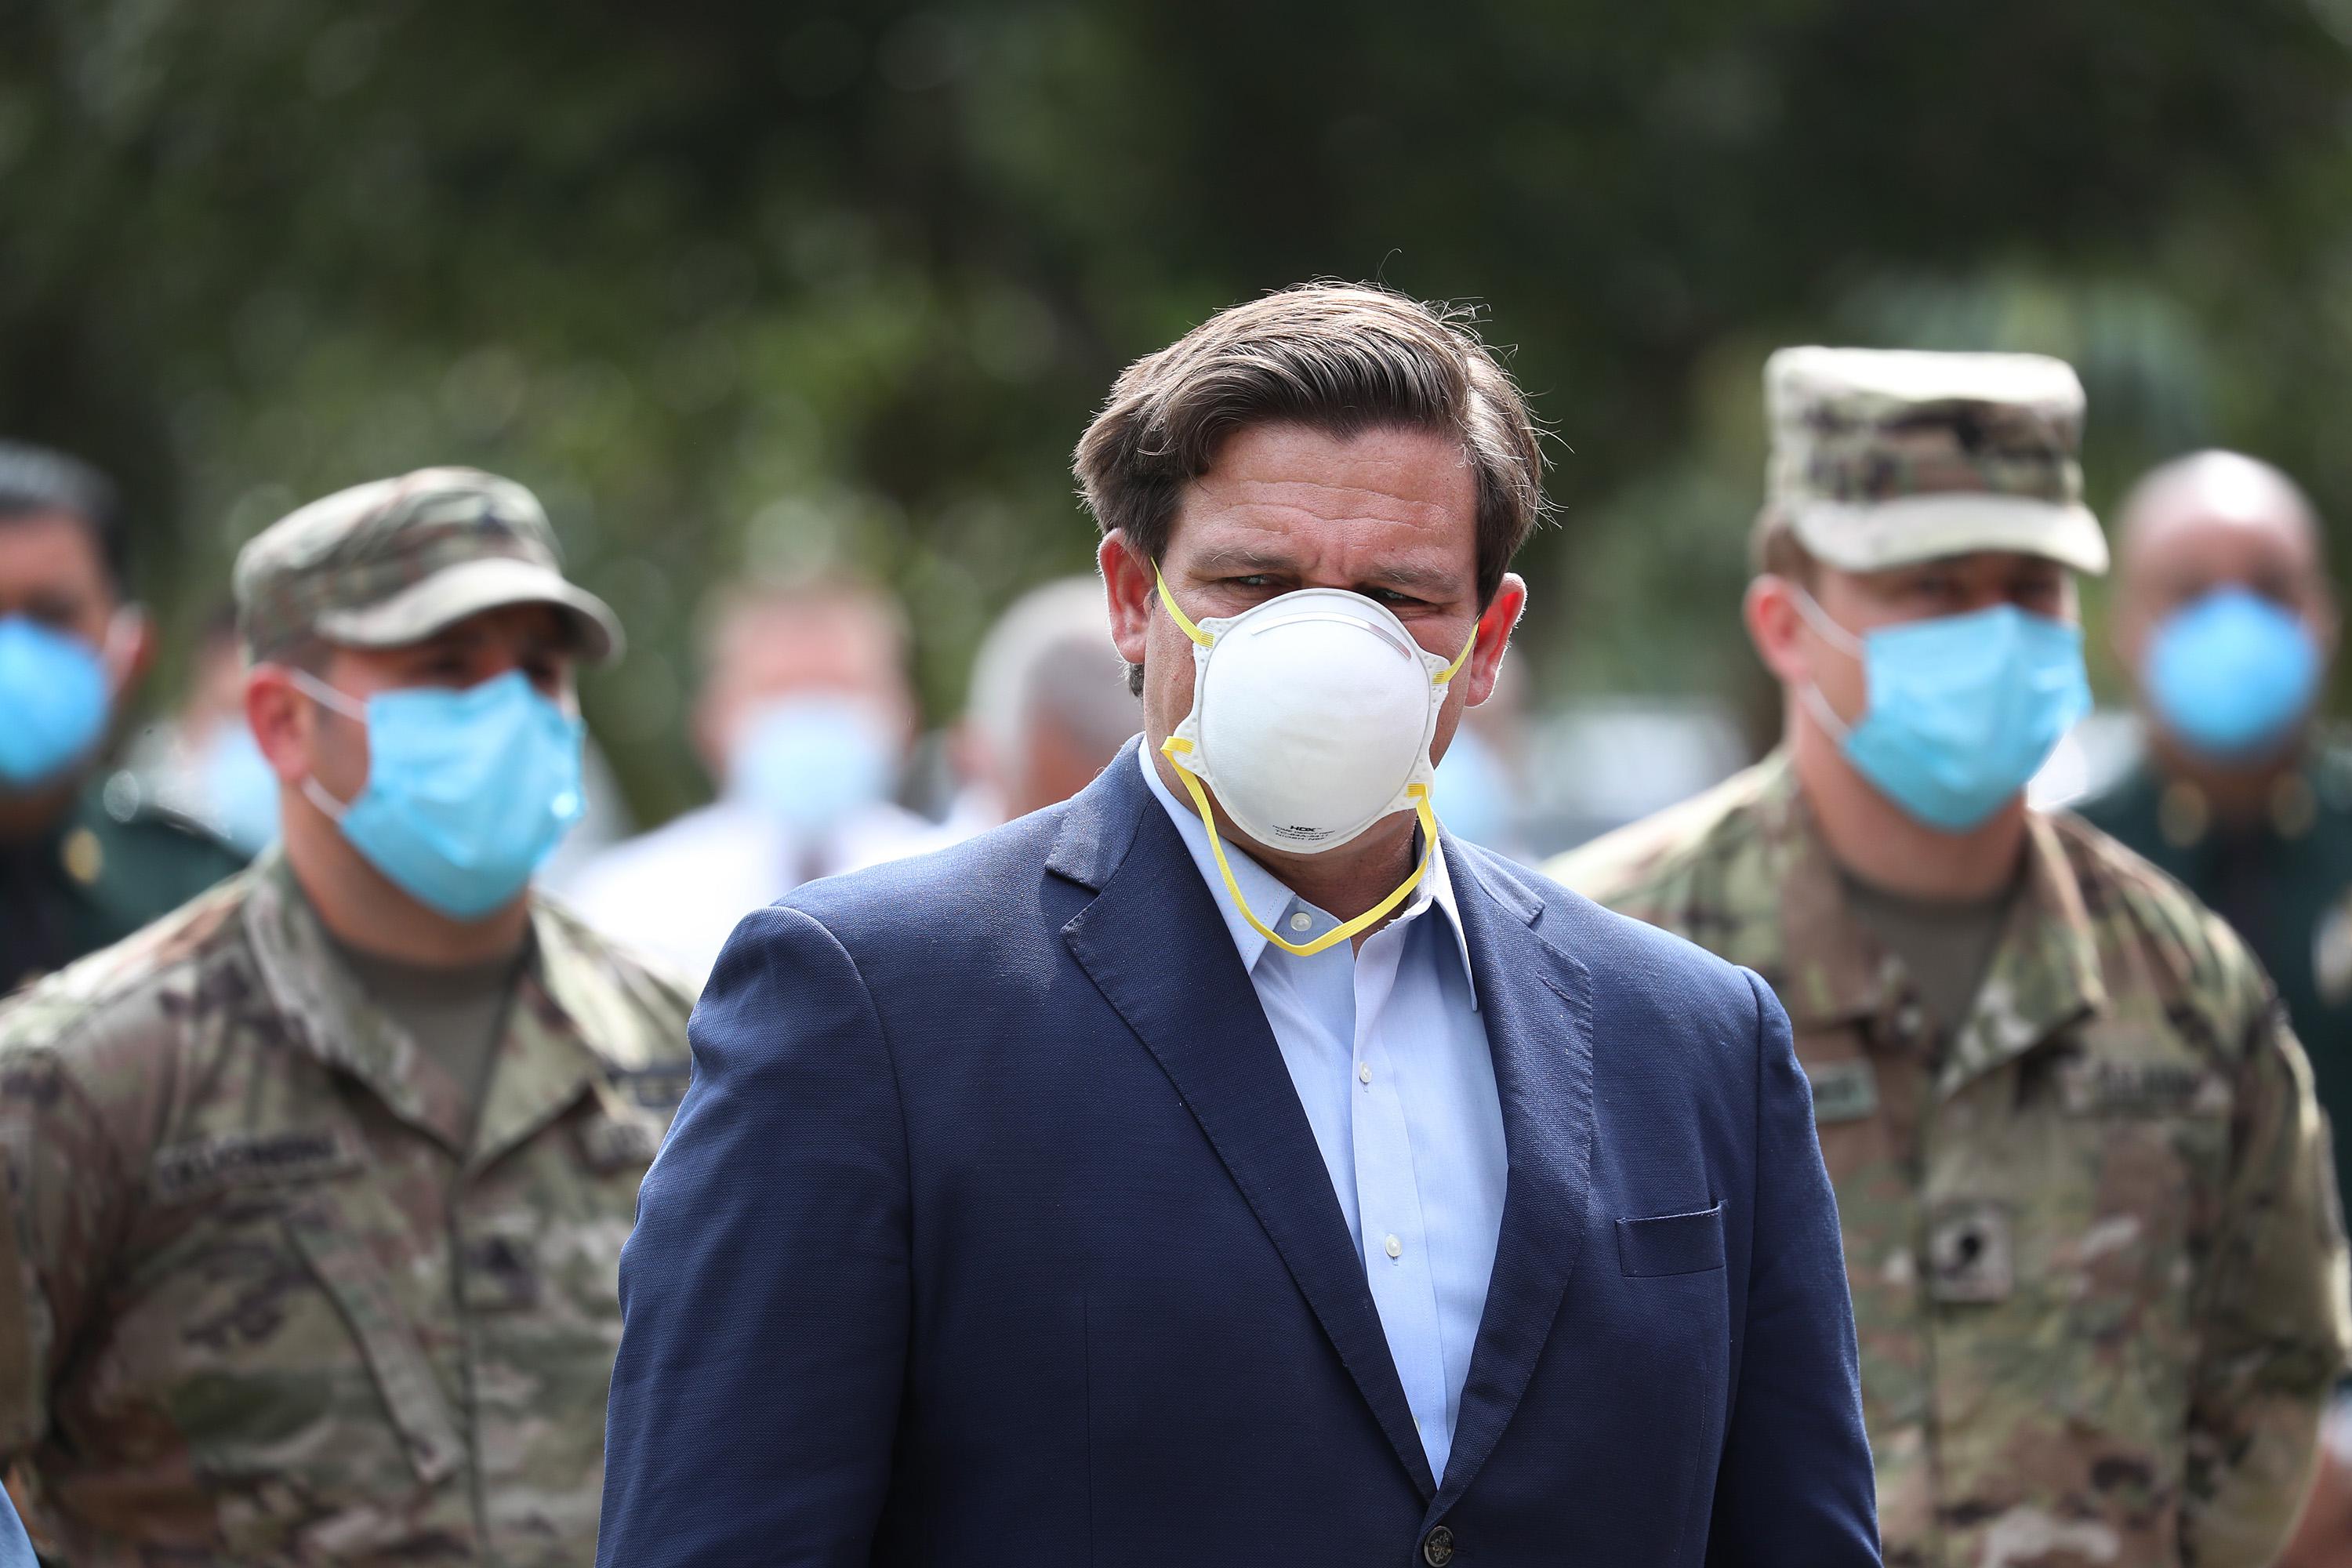 Ron DeSantis, wearing a mask, stands in front of National Guard members wearing masks